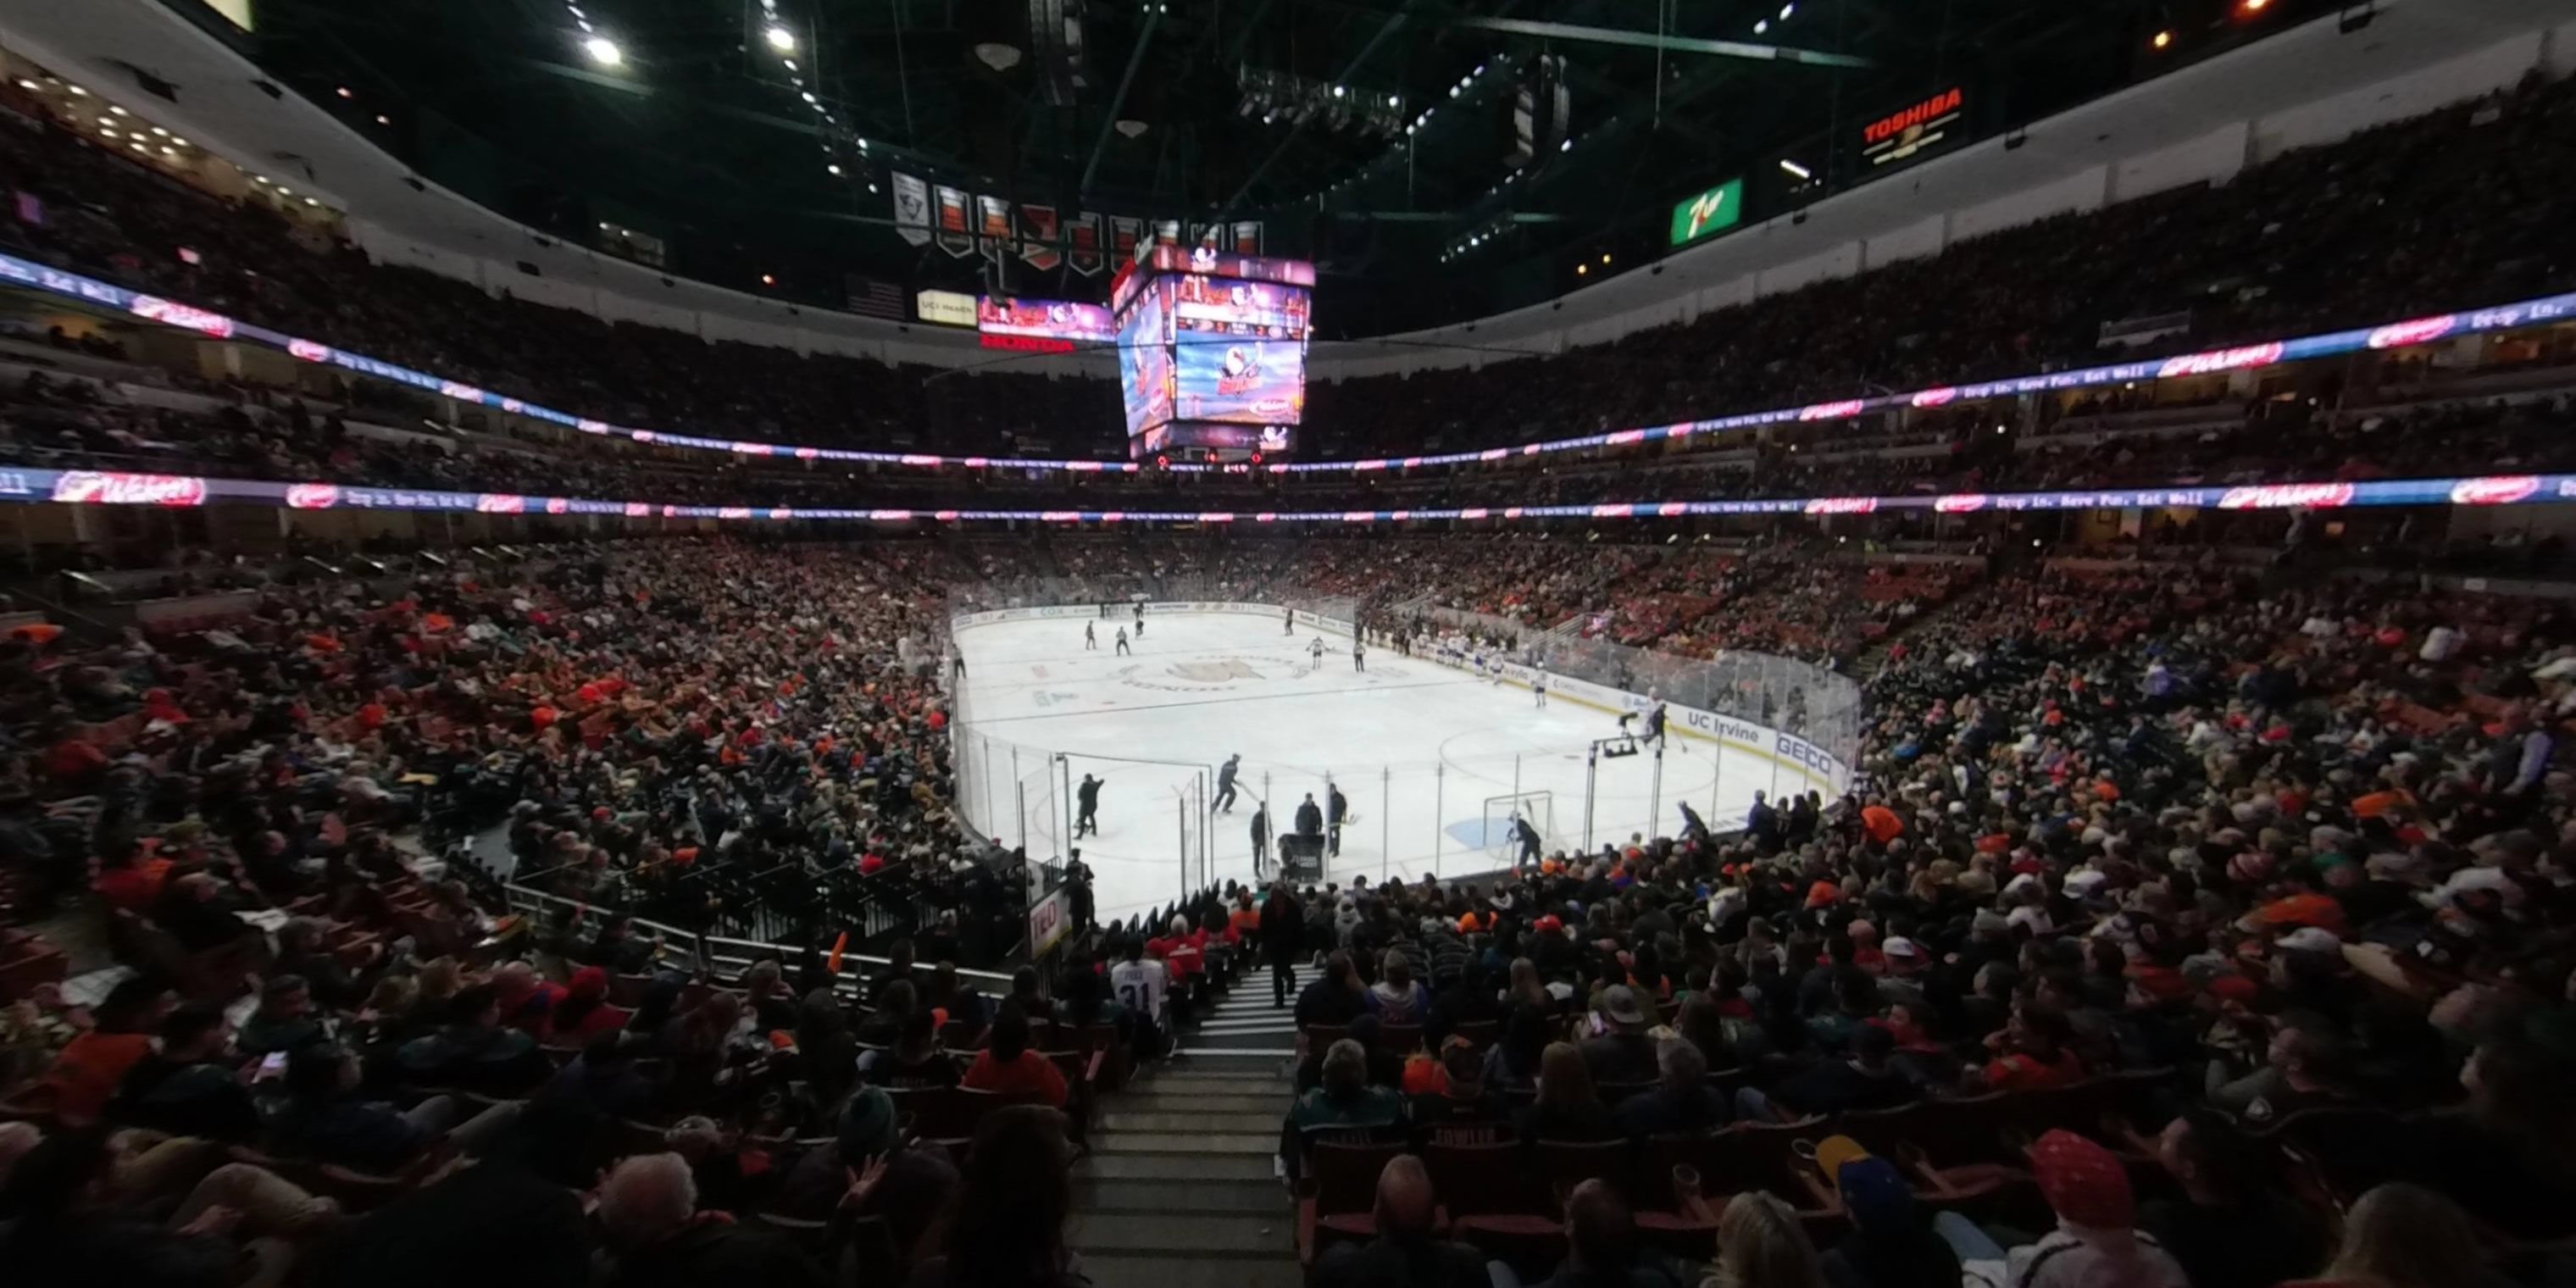 section 216 panoramic seat view  for hockey - honda center